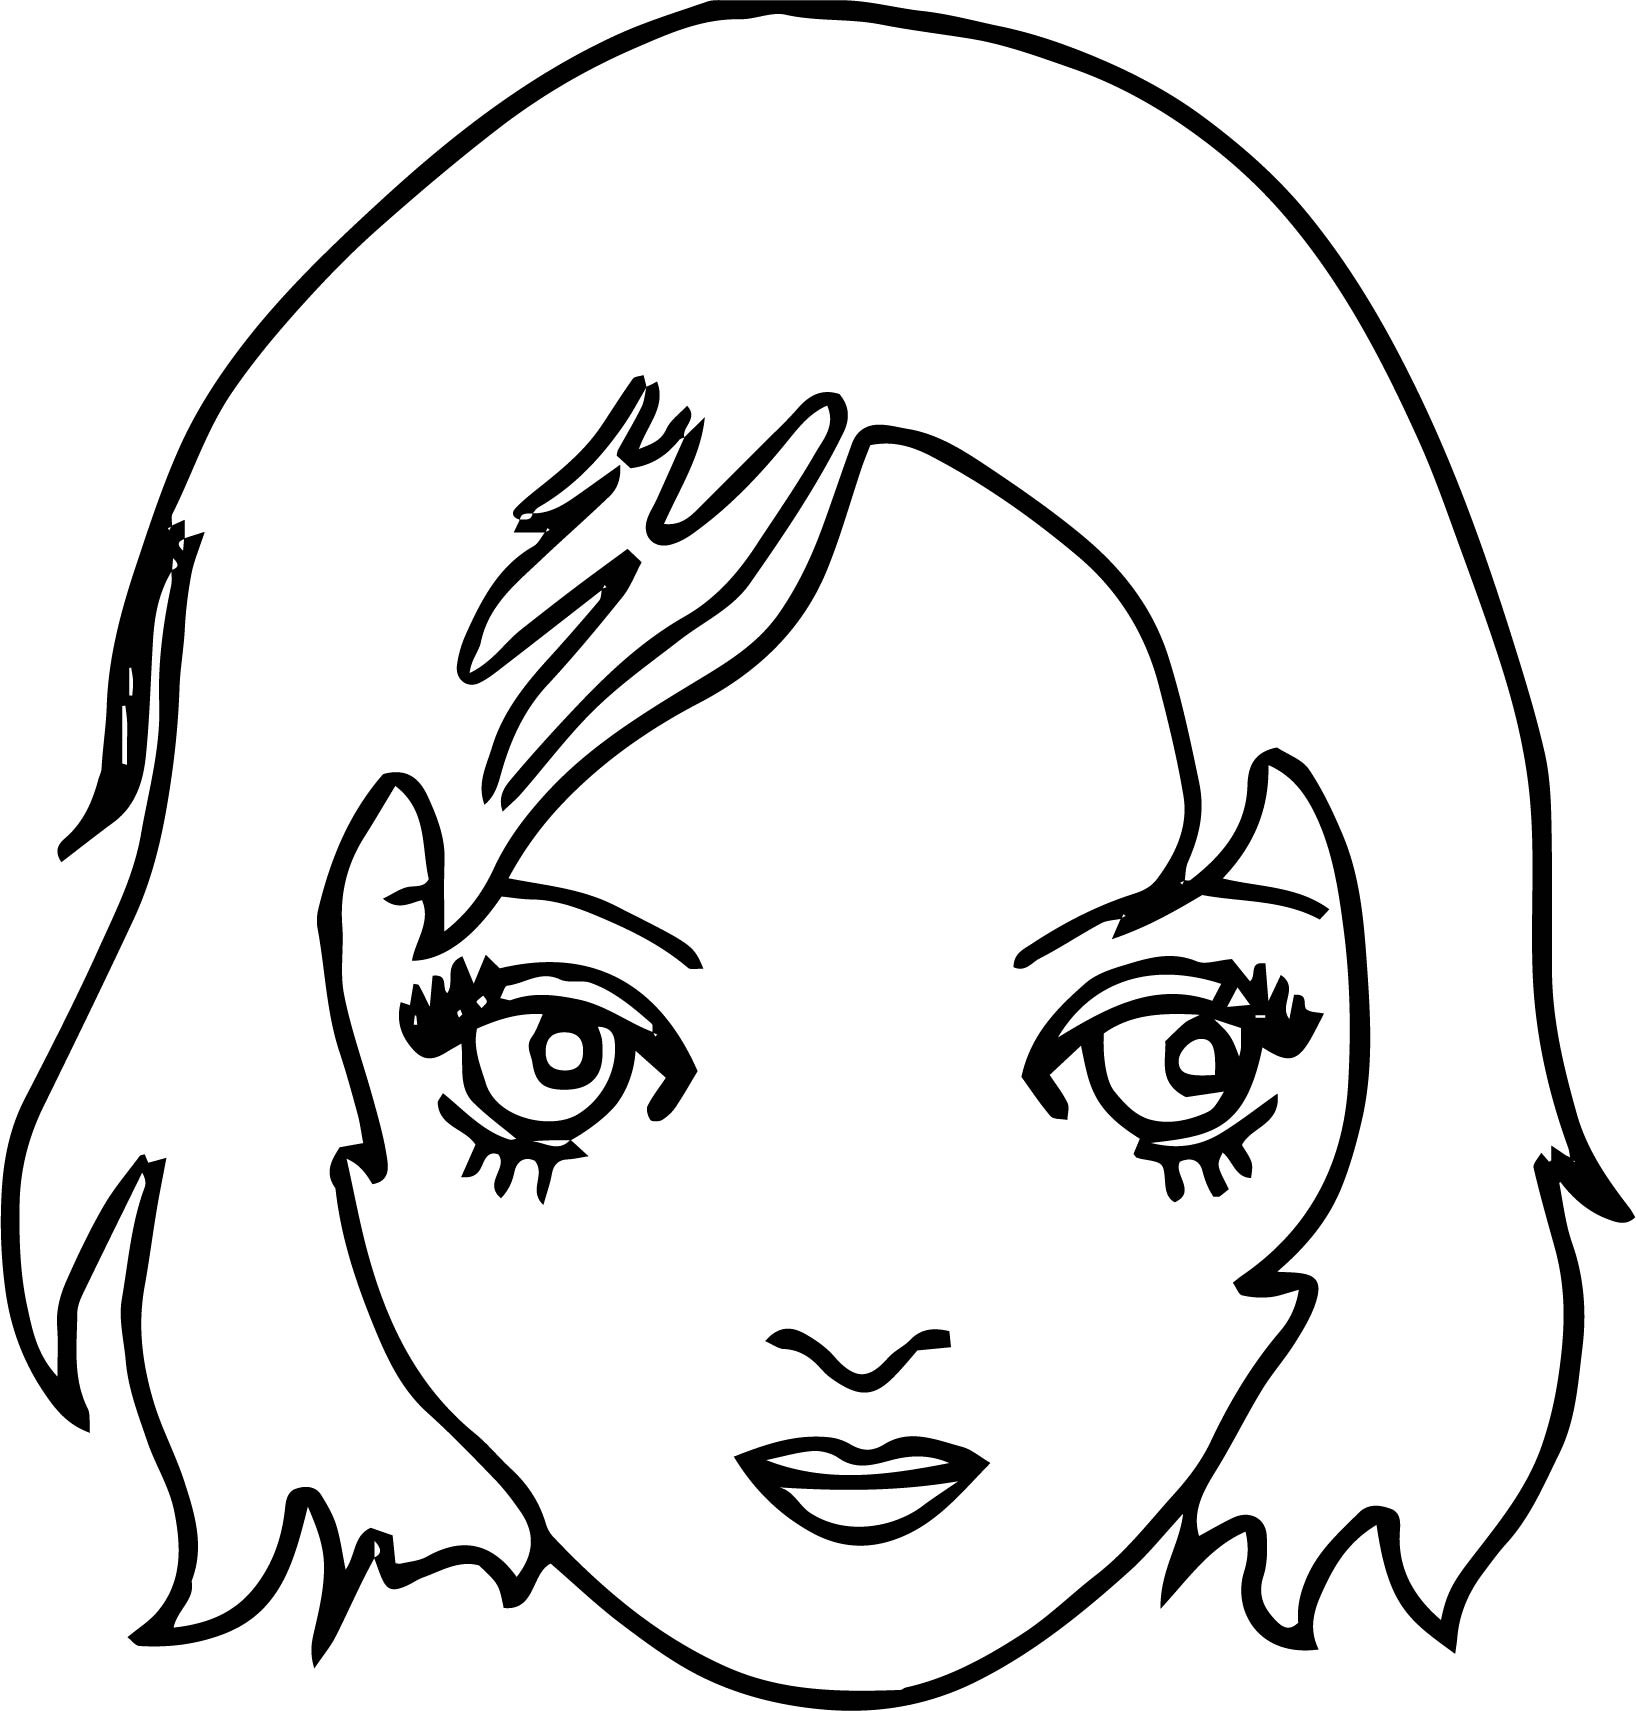 Girl Faces Coloring Pages
 New Girl Face Coloring Page